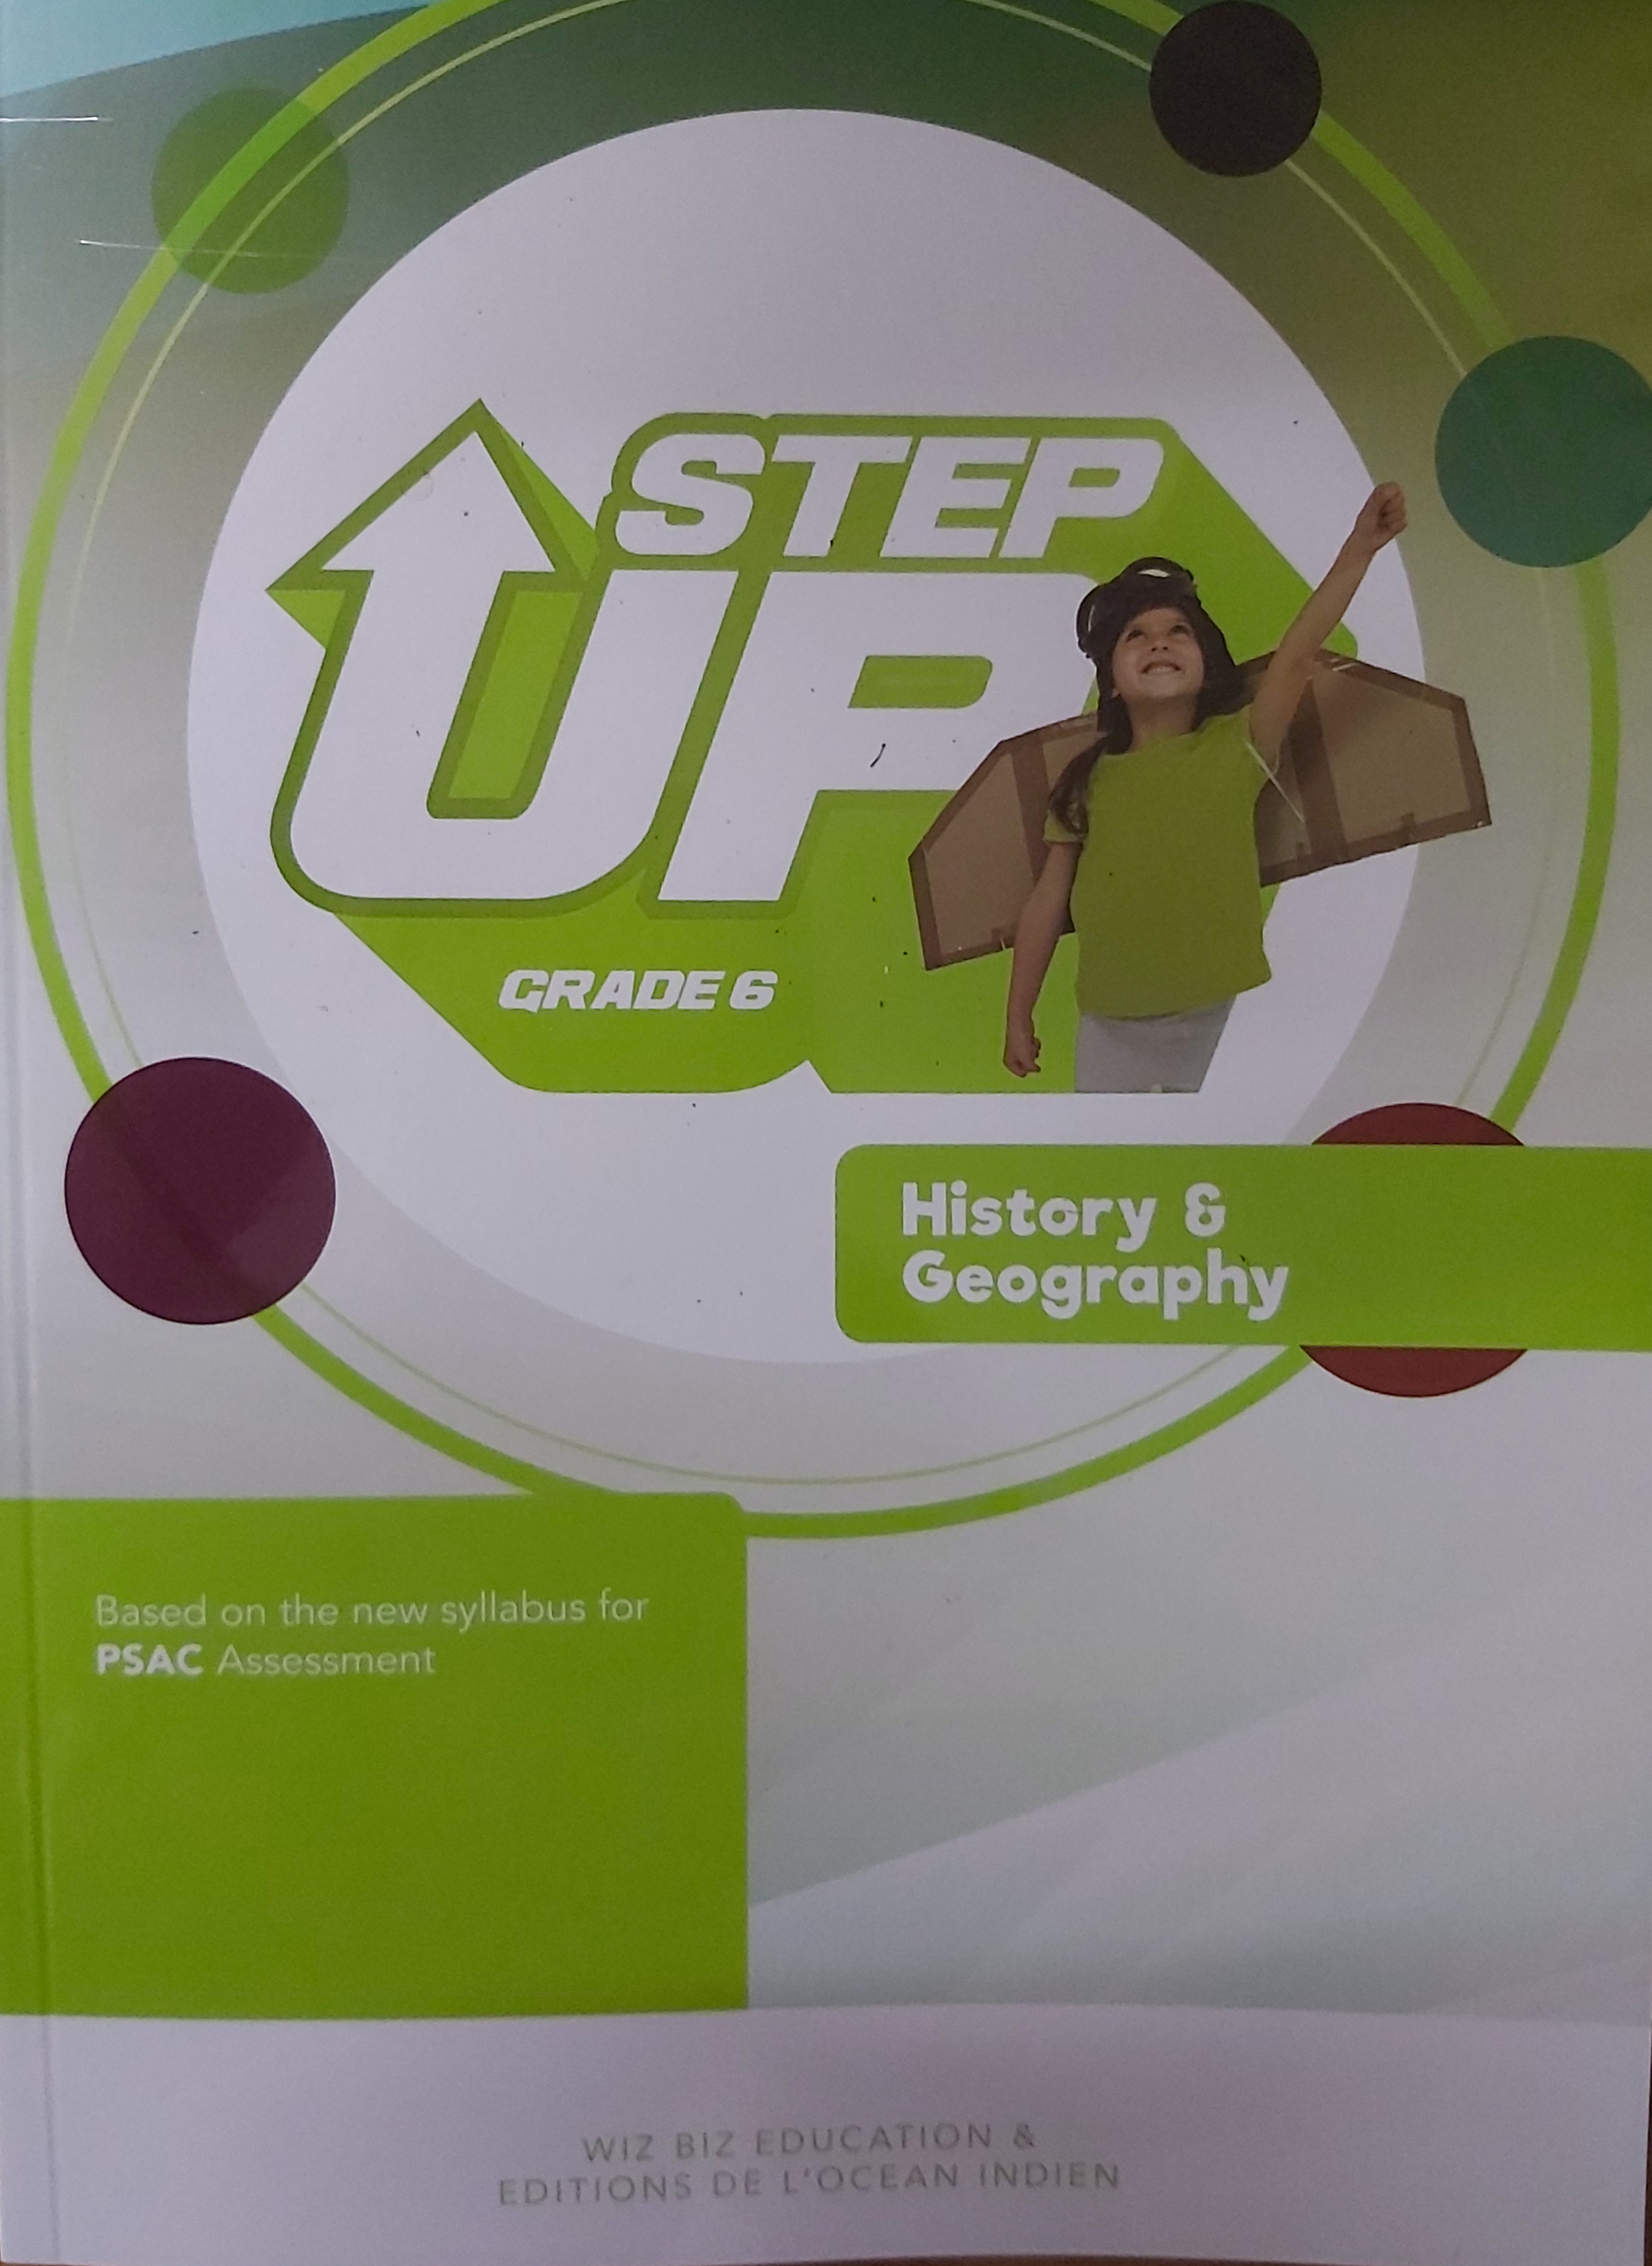 STEP UP GRADE 6 - HISTORY & GEOGRAPHY